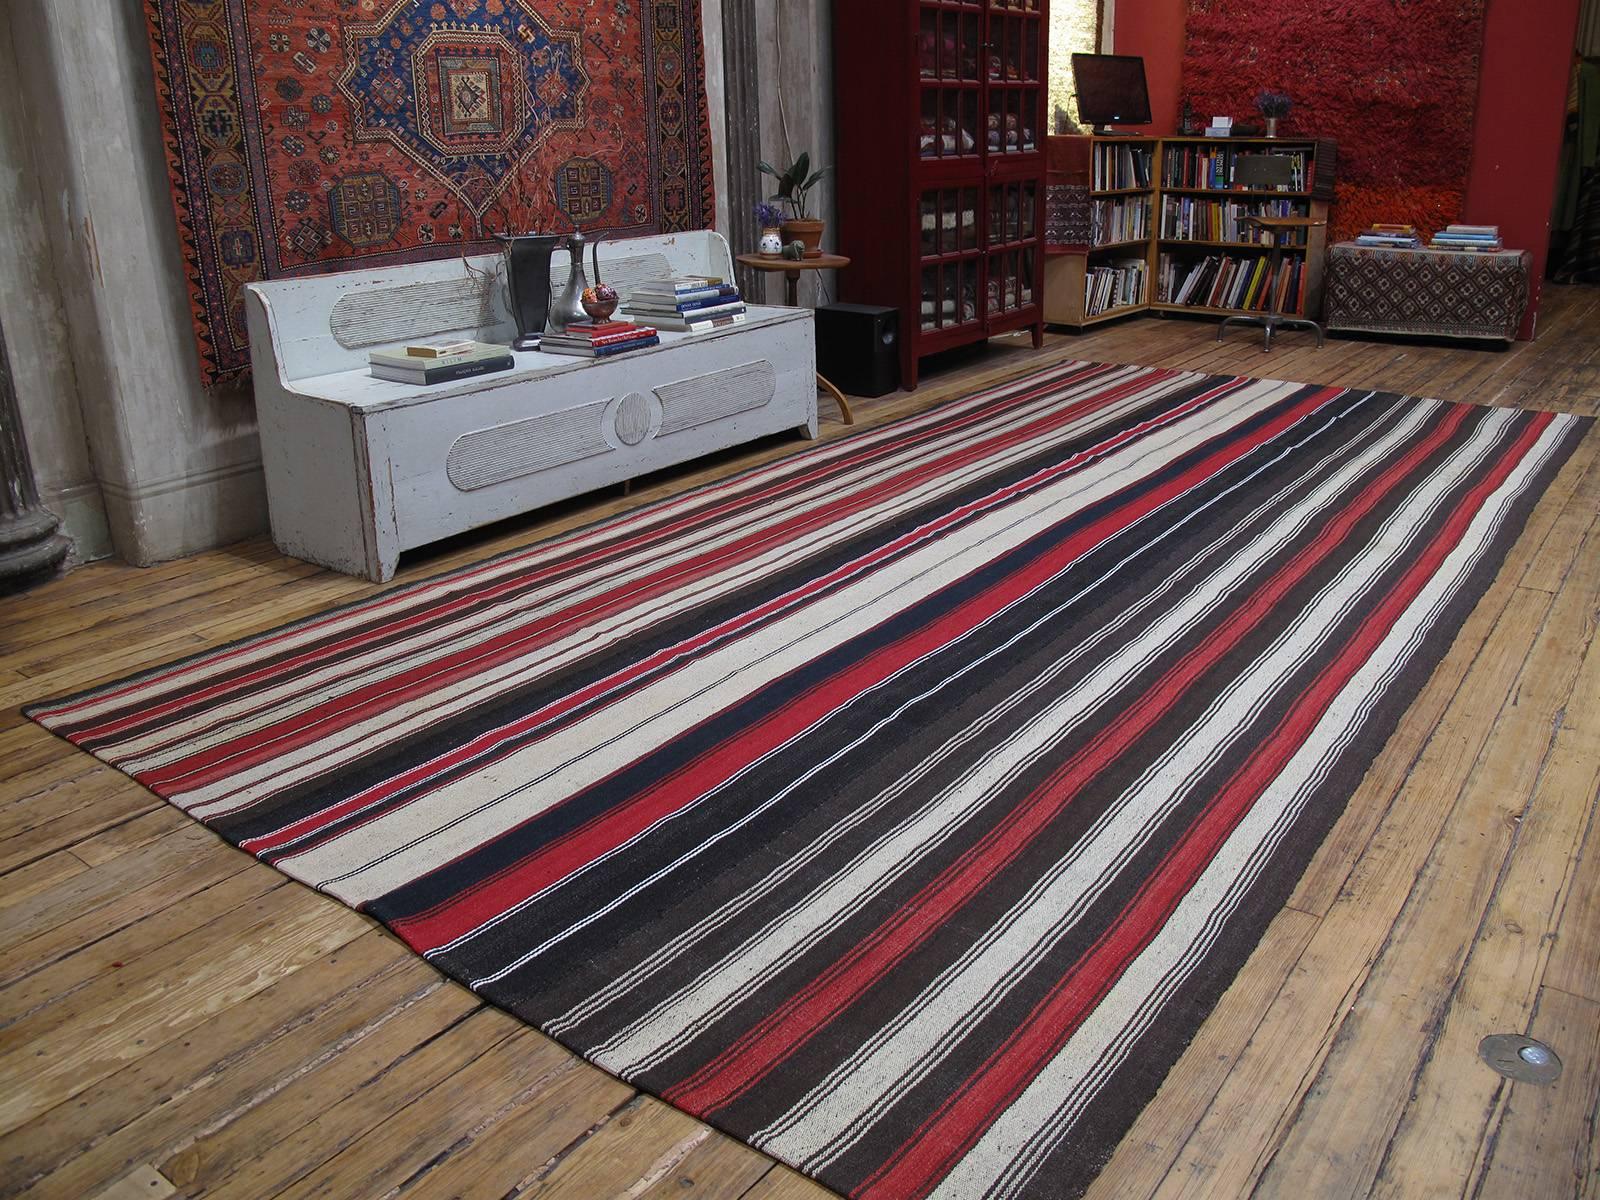 Large Kilim rug with vertical stripes. A large tribal floor cover or rug, woven with goat hair and wool in natural tones and red stripes. Very high quality weaving in excellent condition. (Rug size can be adjusted. Please inquire.)